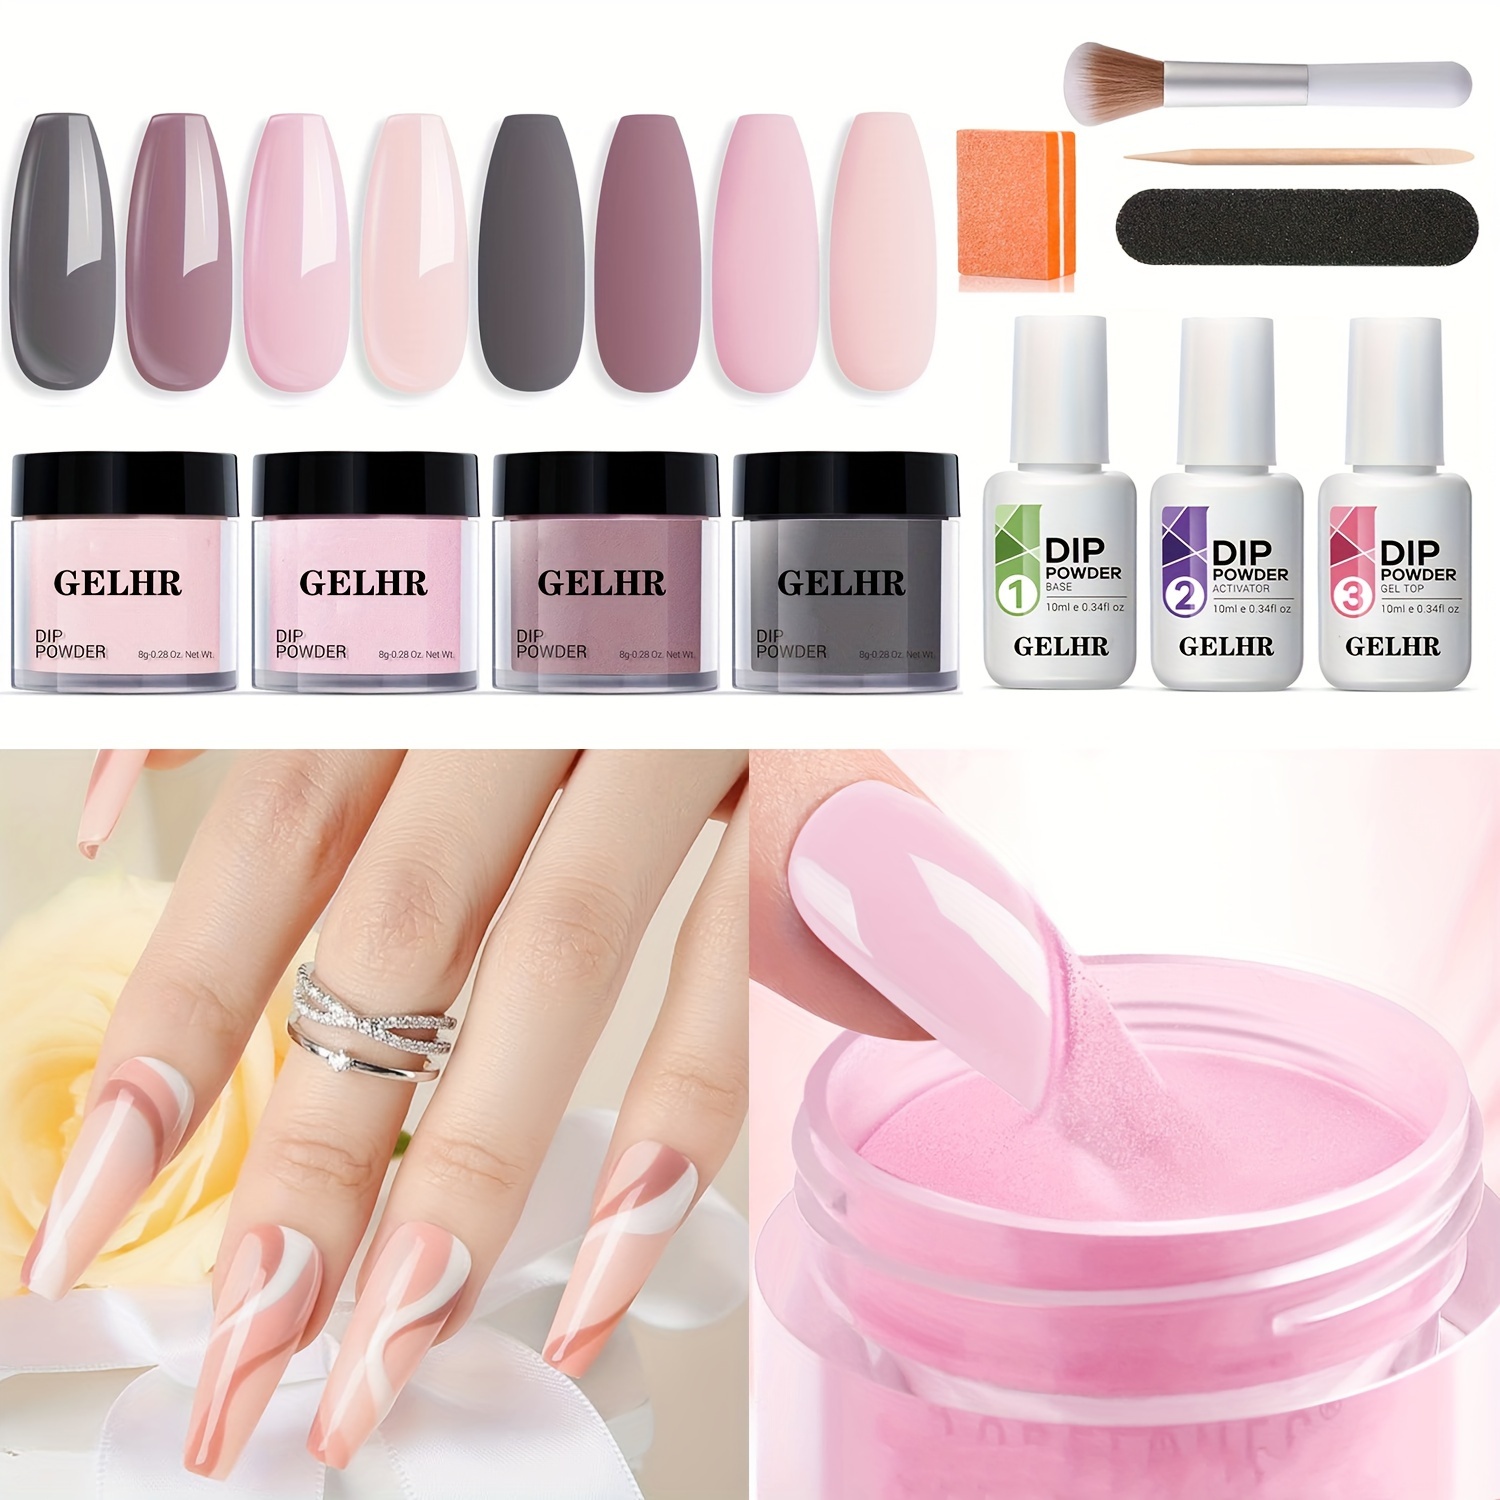 AZUREBEAUTY Color Changing Dip Powder Nail Kit, Winter Dark Blue Green Pink  Grey 4 Colors Dipping Powder Liquid Set with Base Top Coat Activator for